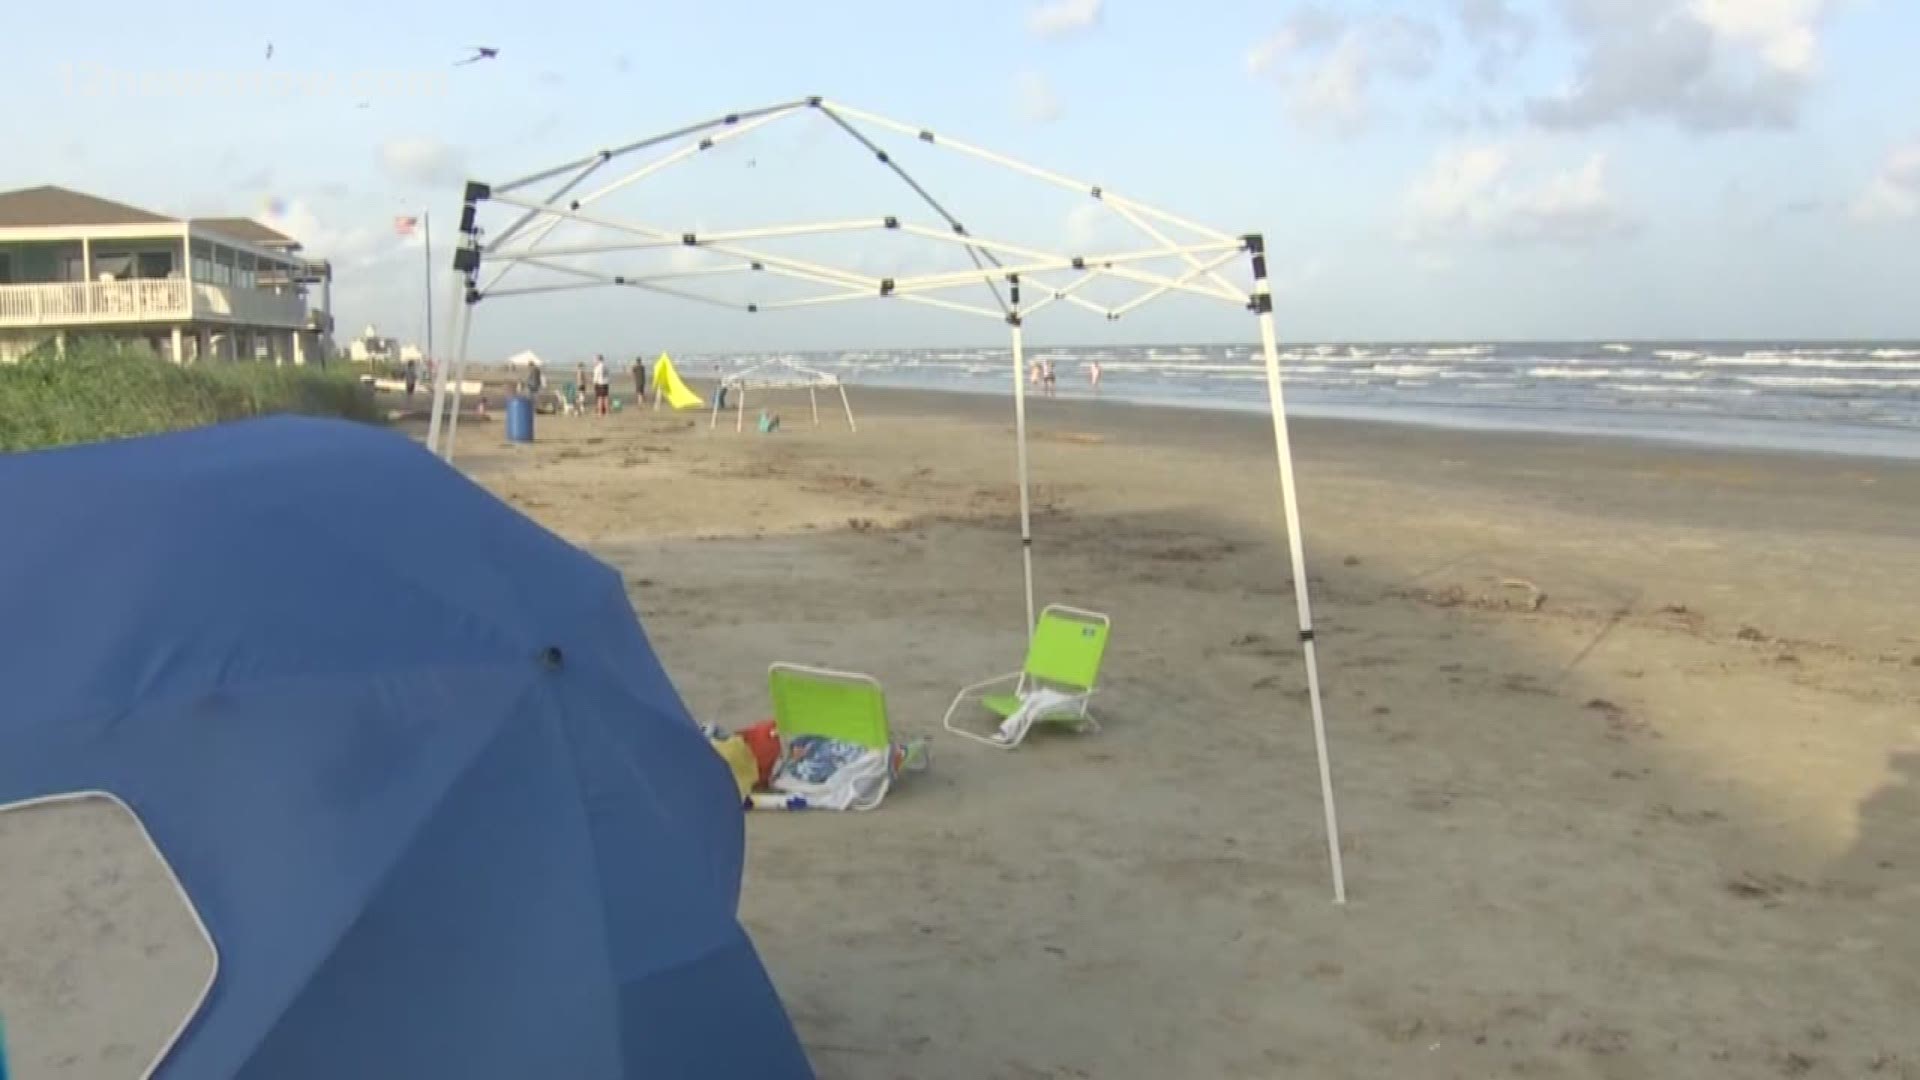 Those celebrating the holiday weekend at the beach should pick up all belongings and trash.